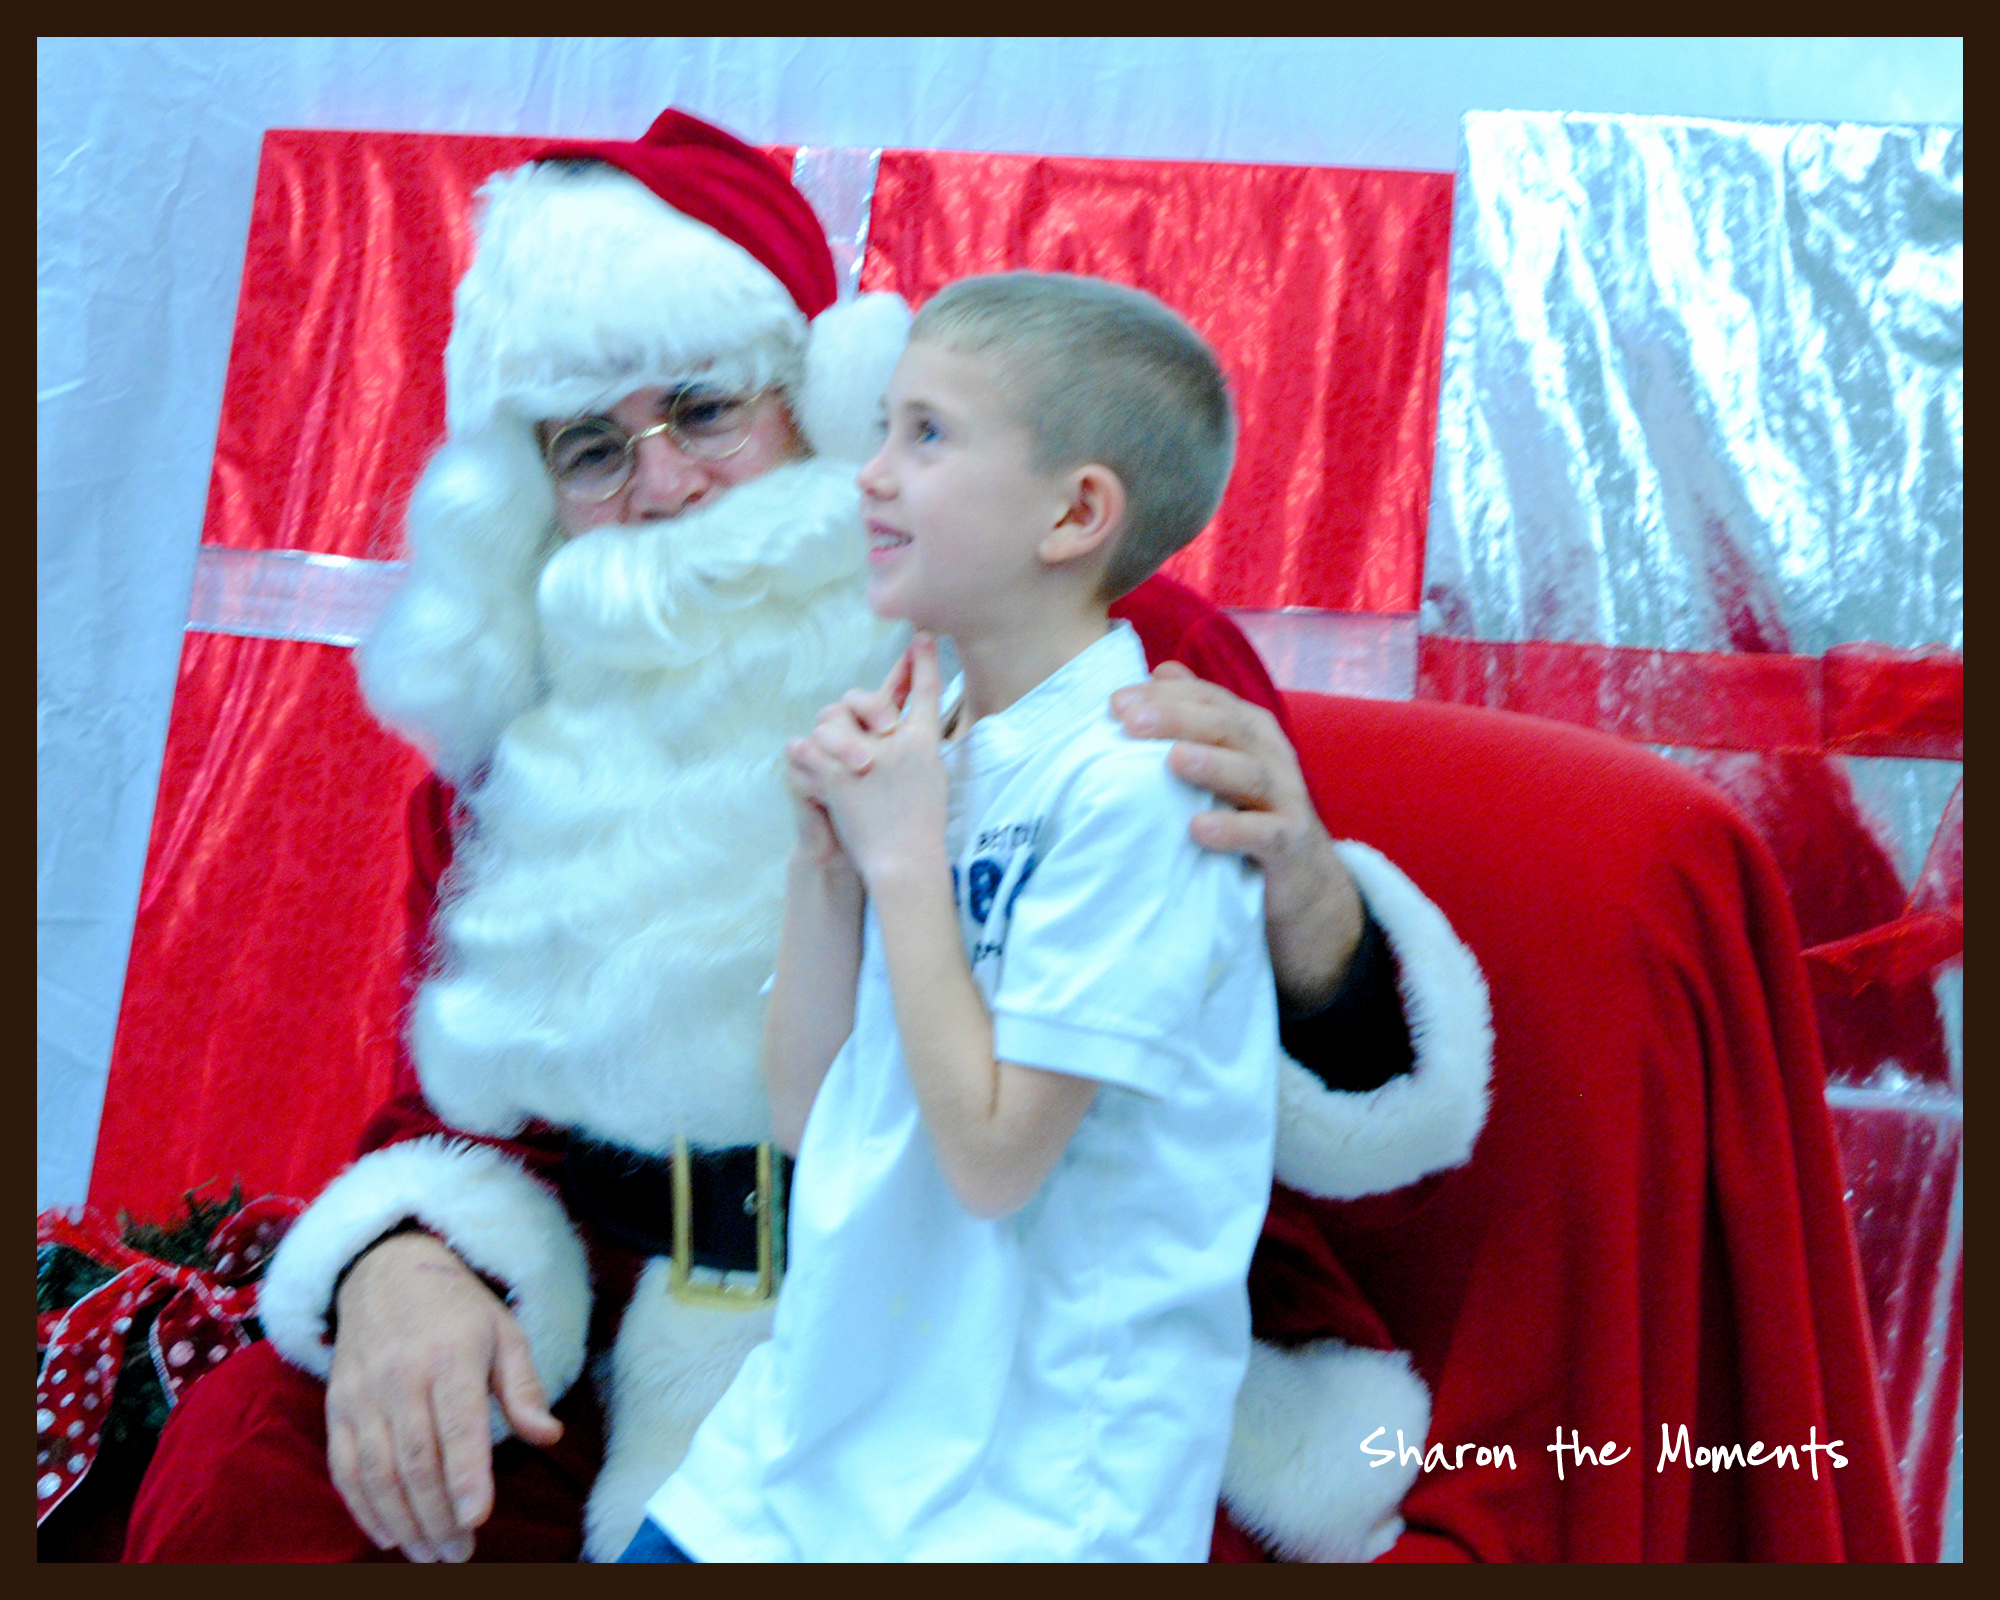 Christmas Present wishing and hoping with Santa Claus|Sharon the Moments blog